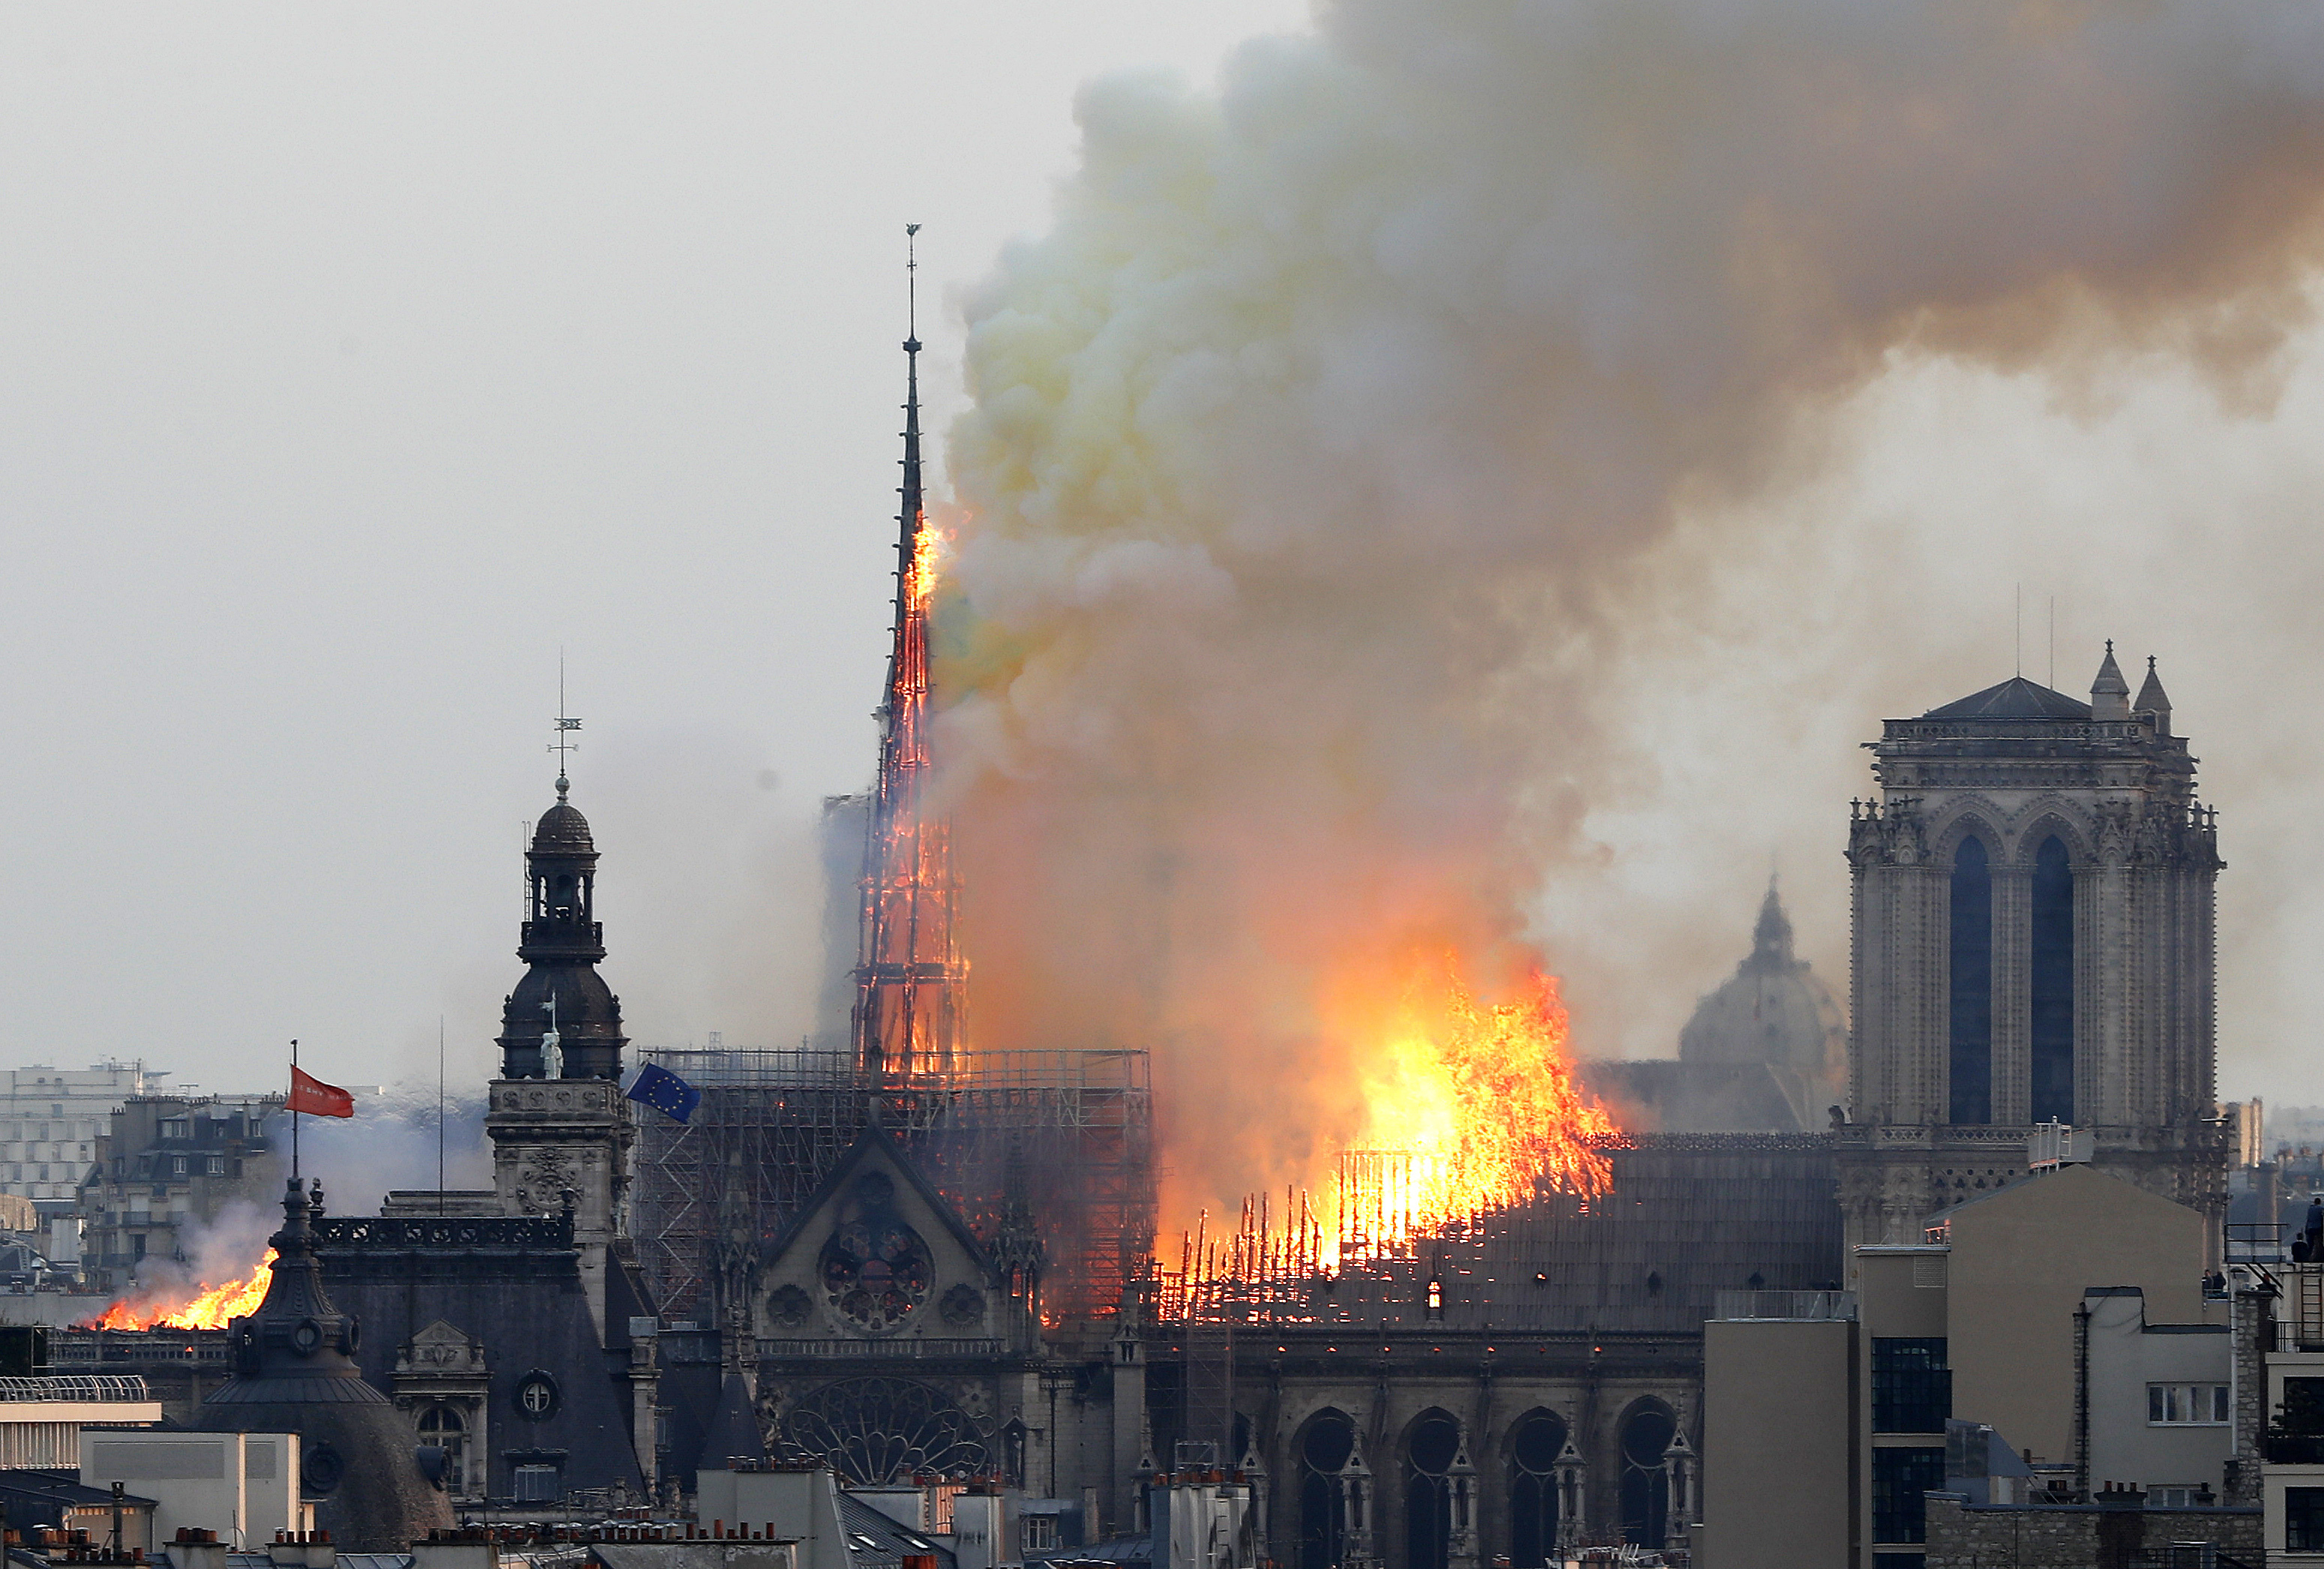 Catastrophic fire engulfs Notre Dame Cathedral in Paris